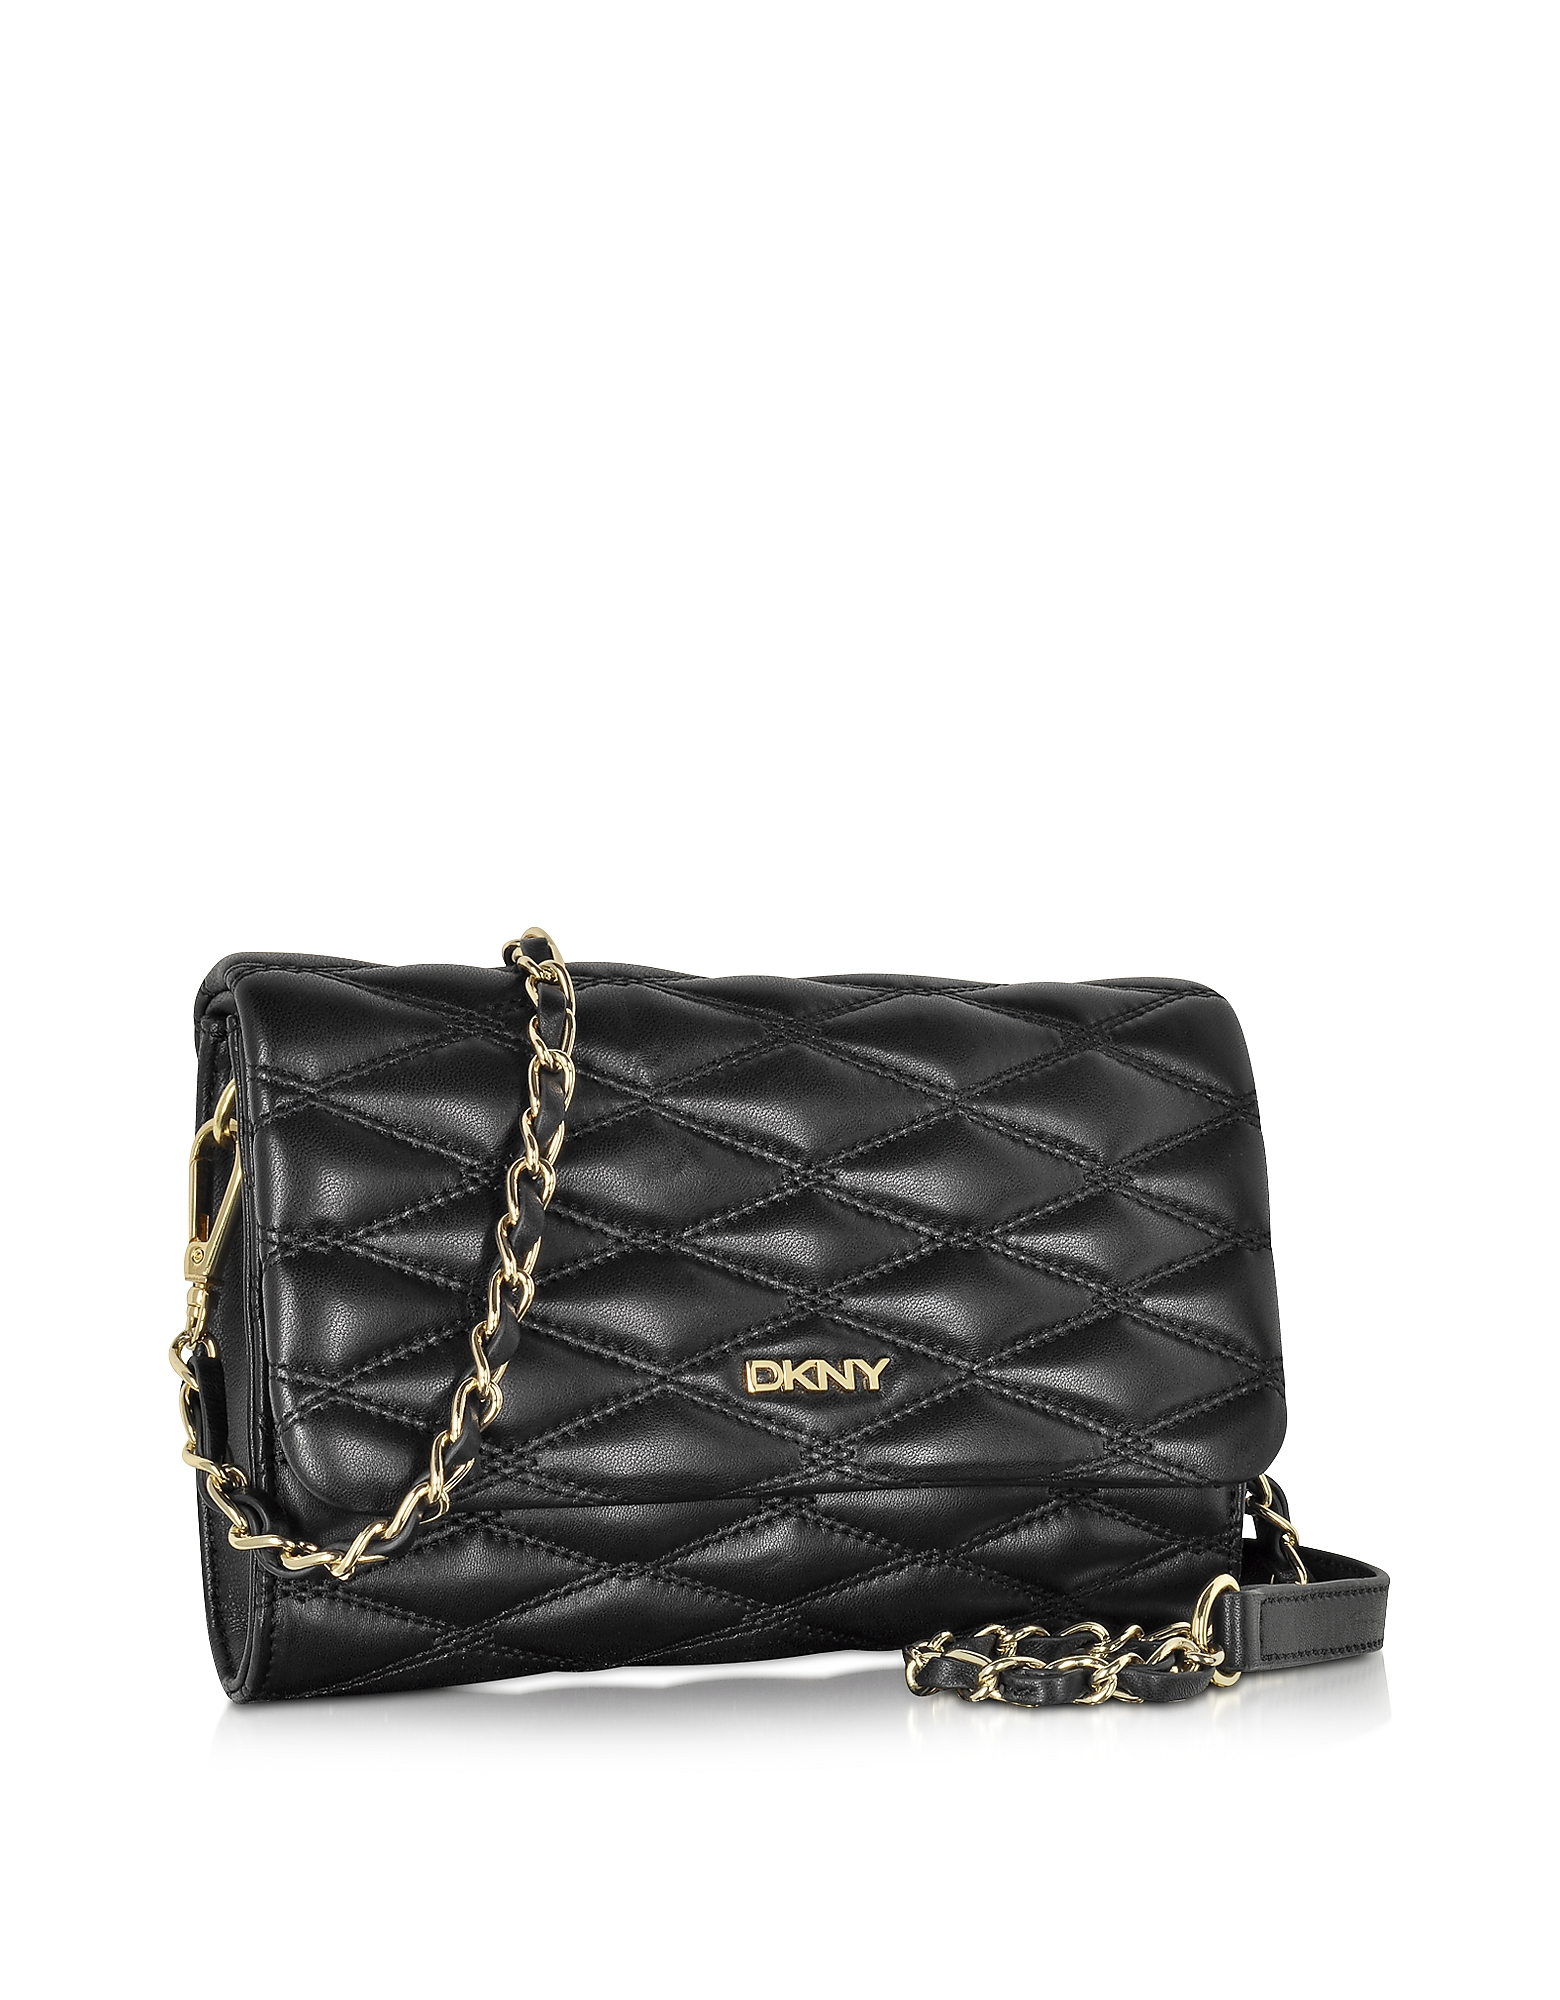 Lyst - Dkny Black Quilted Leather Small Flap Crossbody Bag in Black